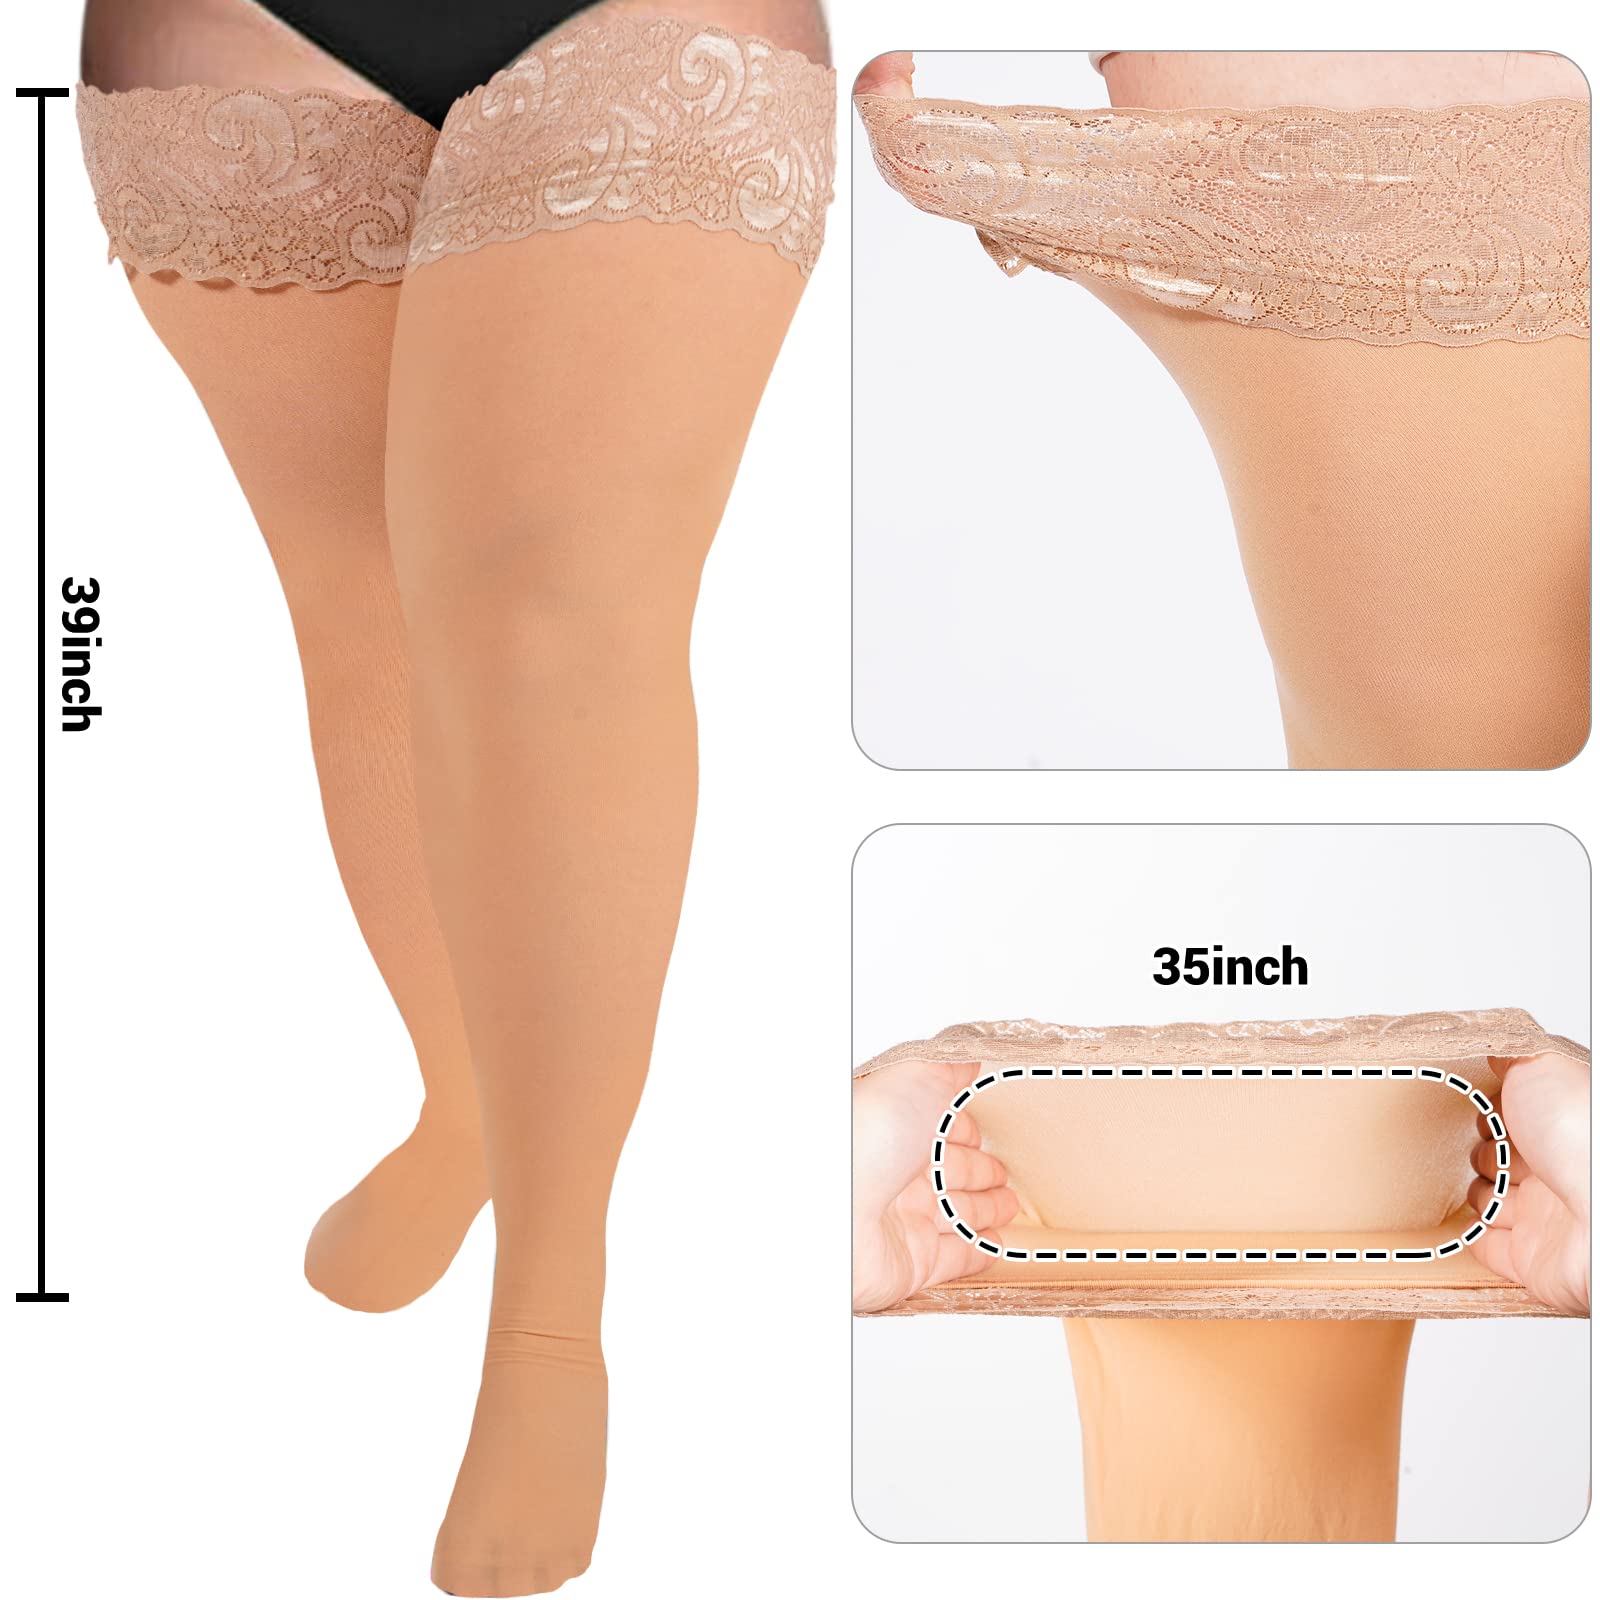 55D Semi Sheer Silicone Lace Stay Up Thigh Highs Pantyhose-Nude - Moon Wood